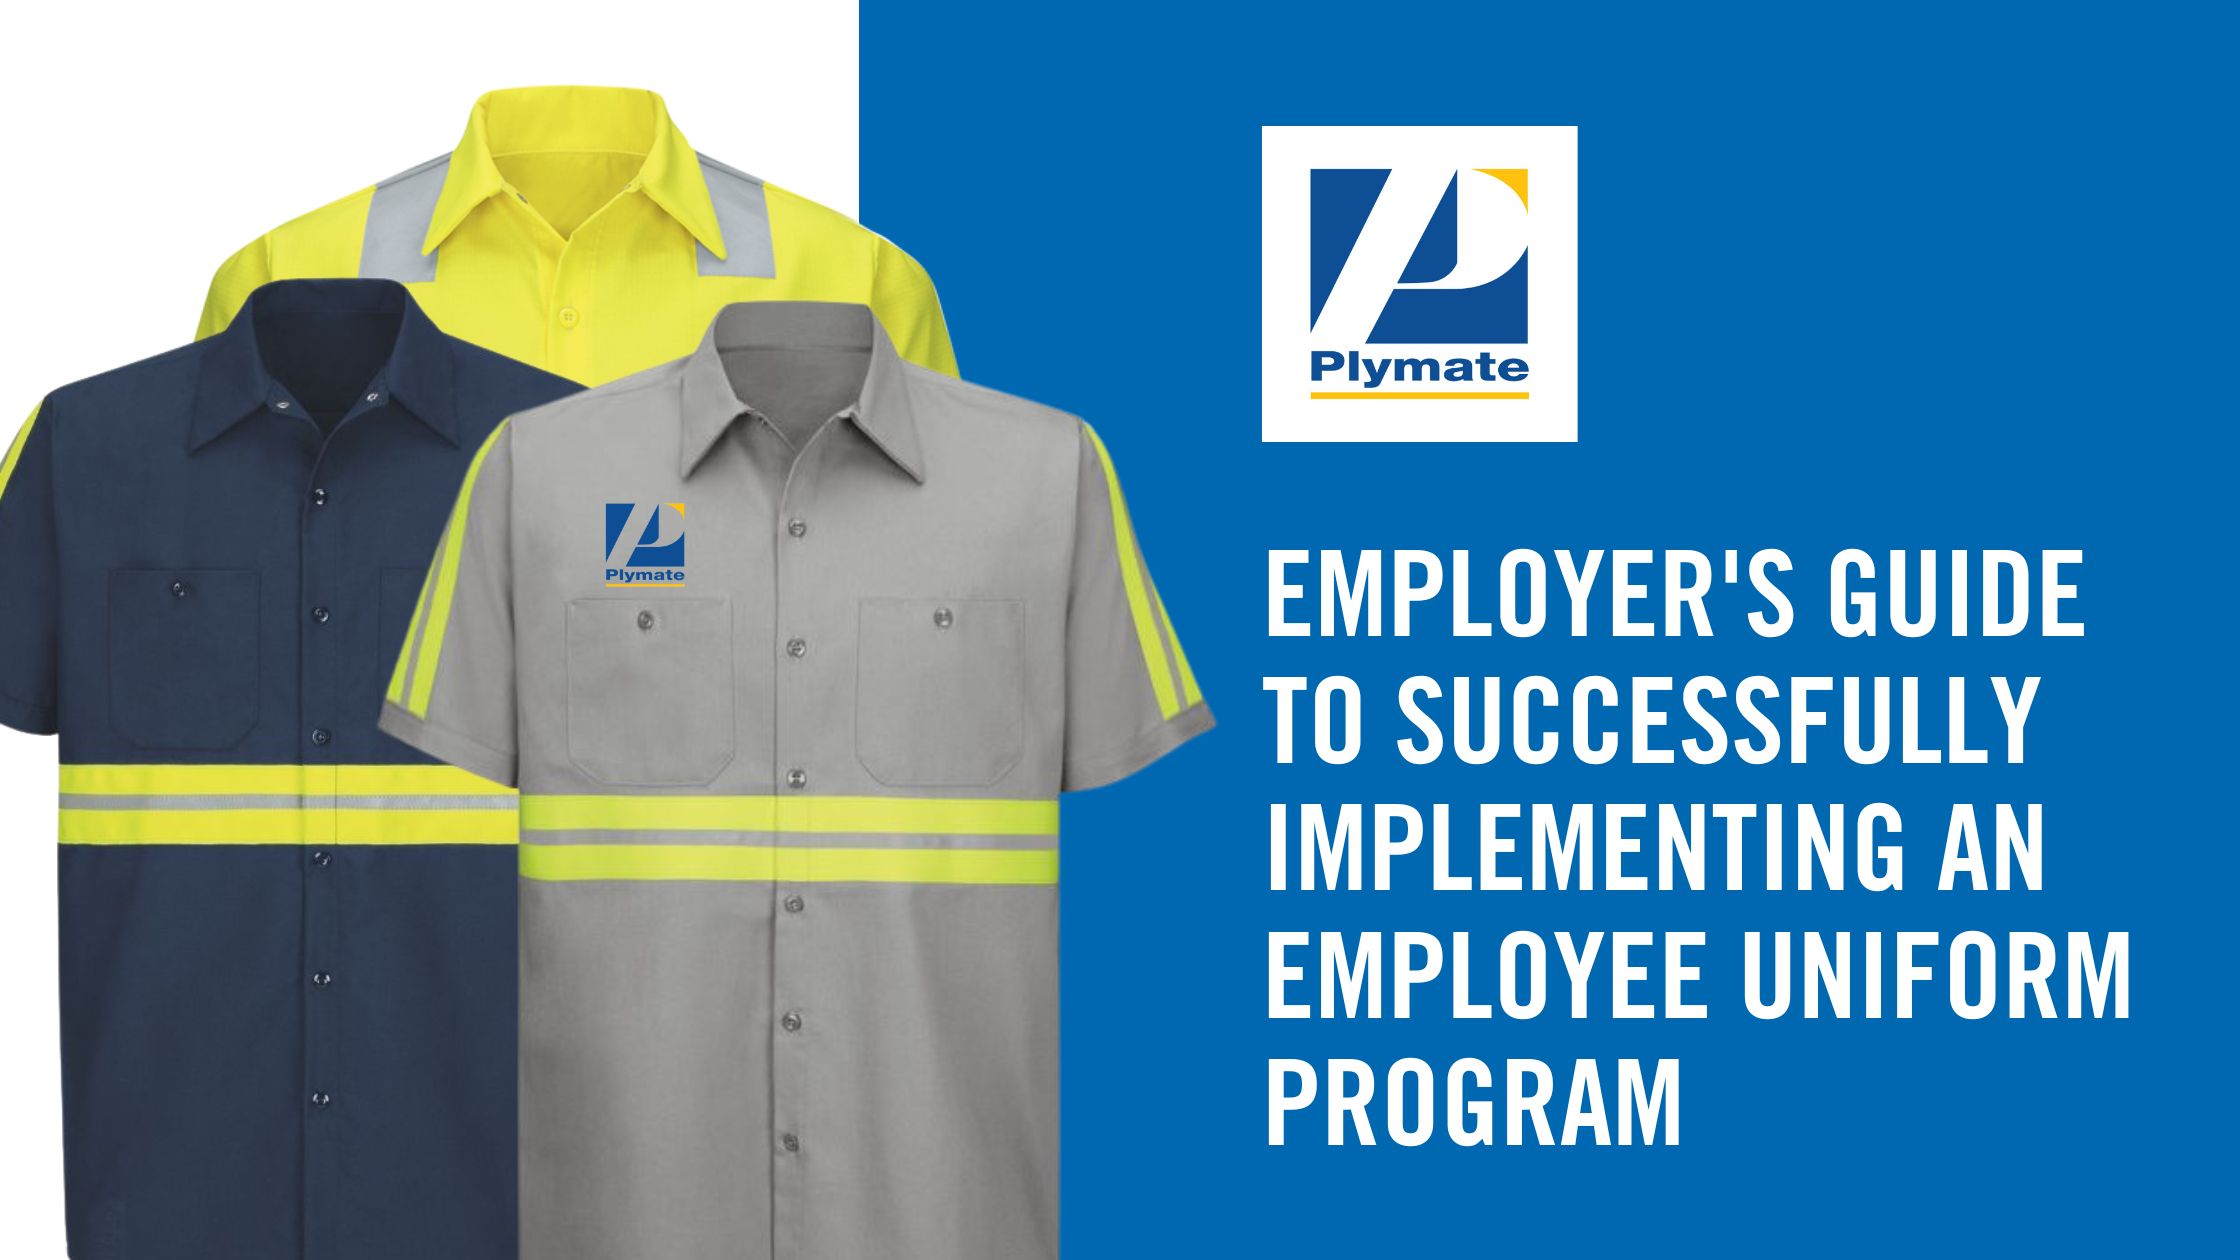 Employer's guide to successfully implementing an employee uniform program